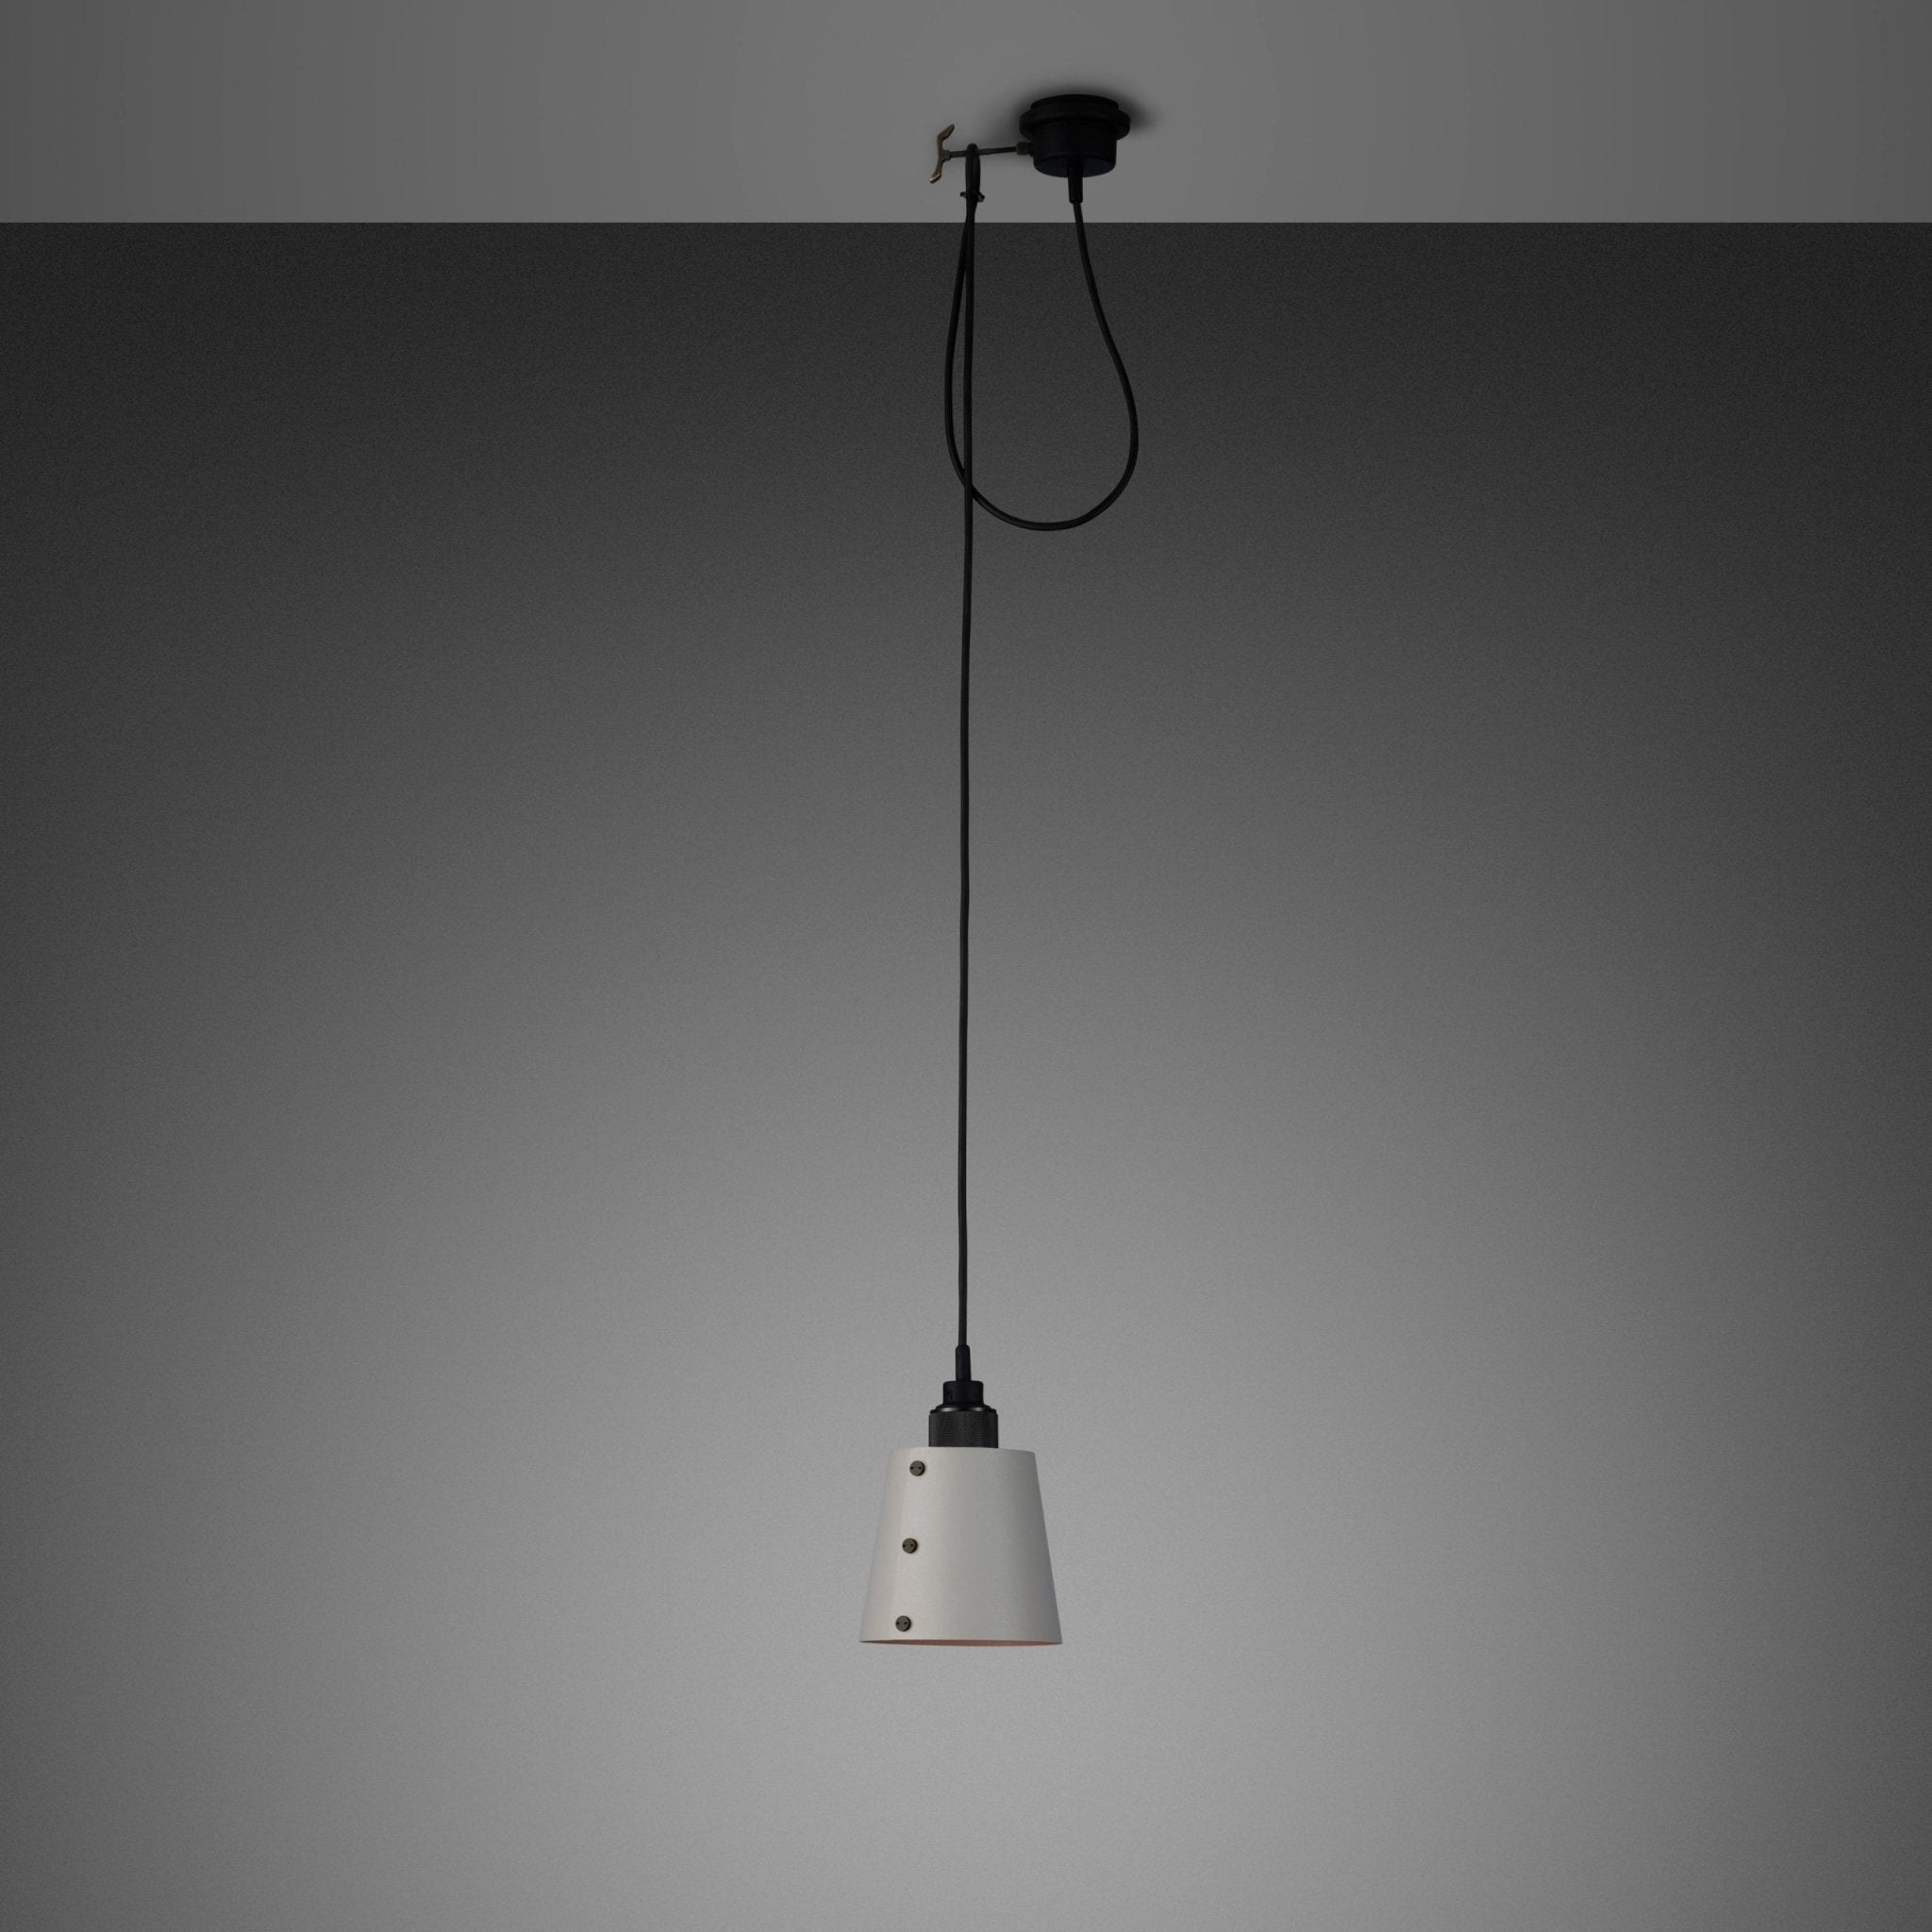 Buster and Punch - Hooked 1.0 / Klein Steen Shade 2.0m Hanglamp - KOOT